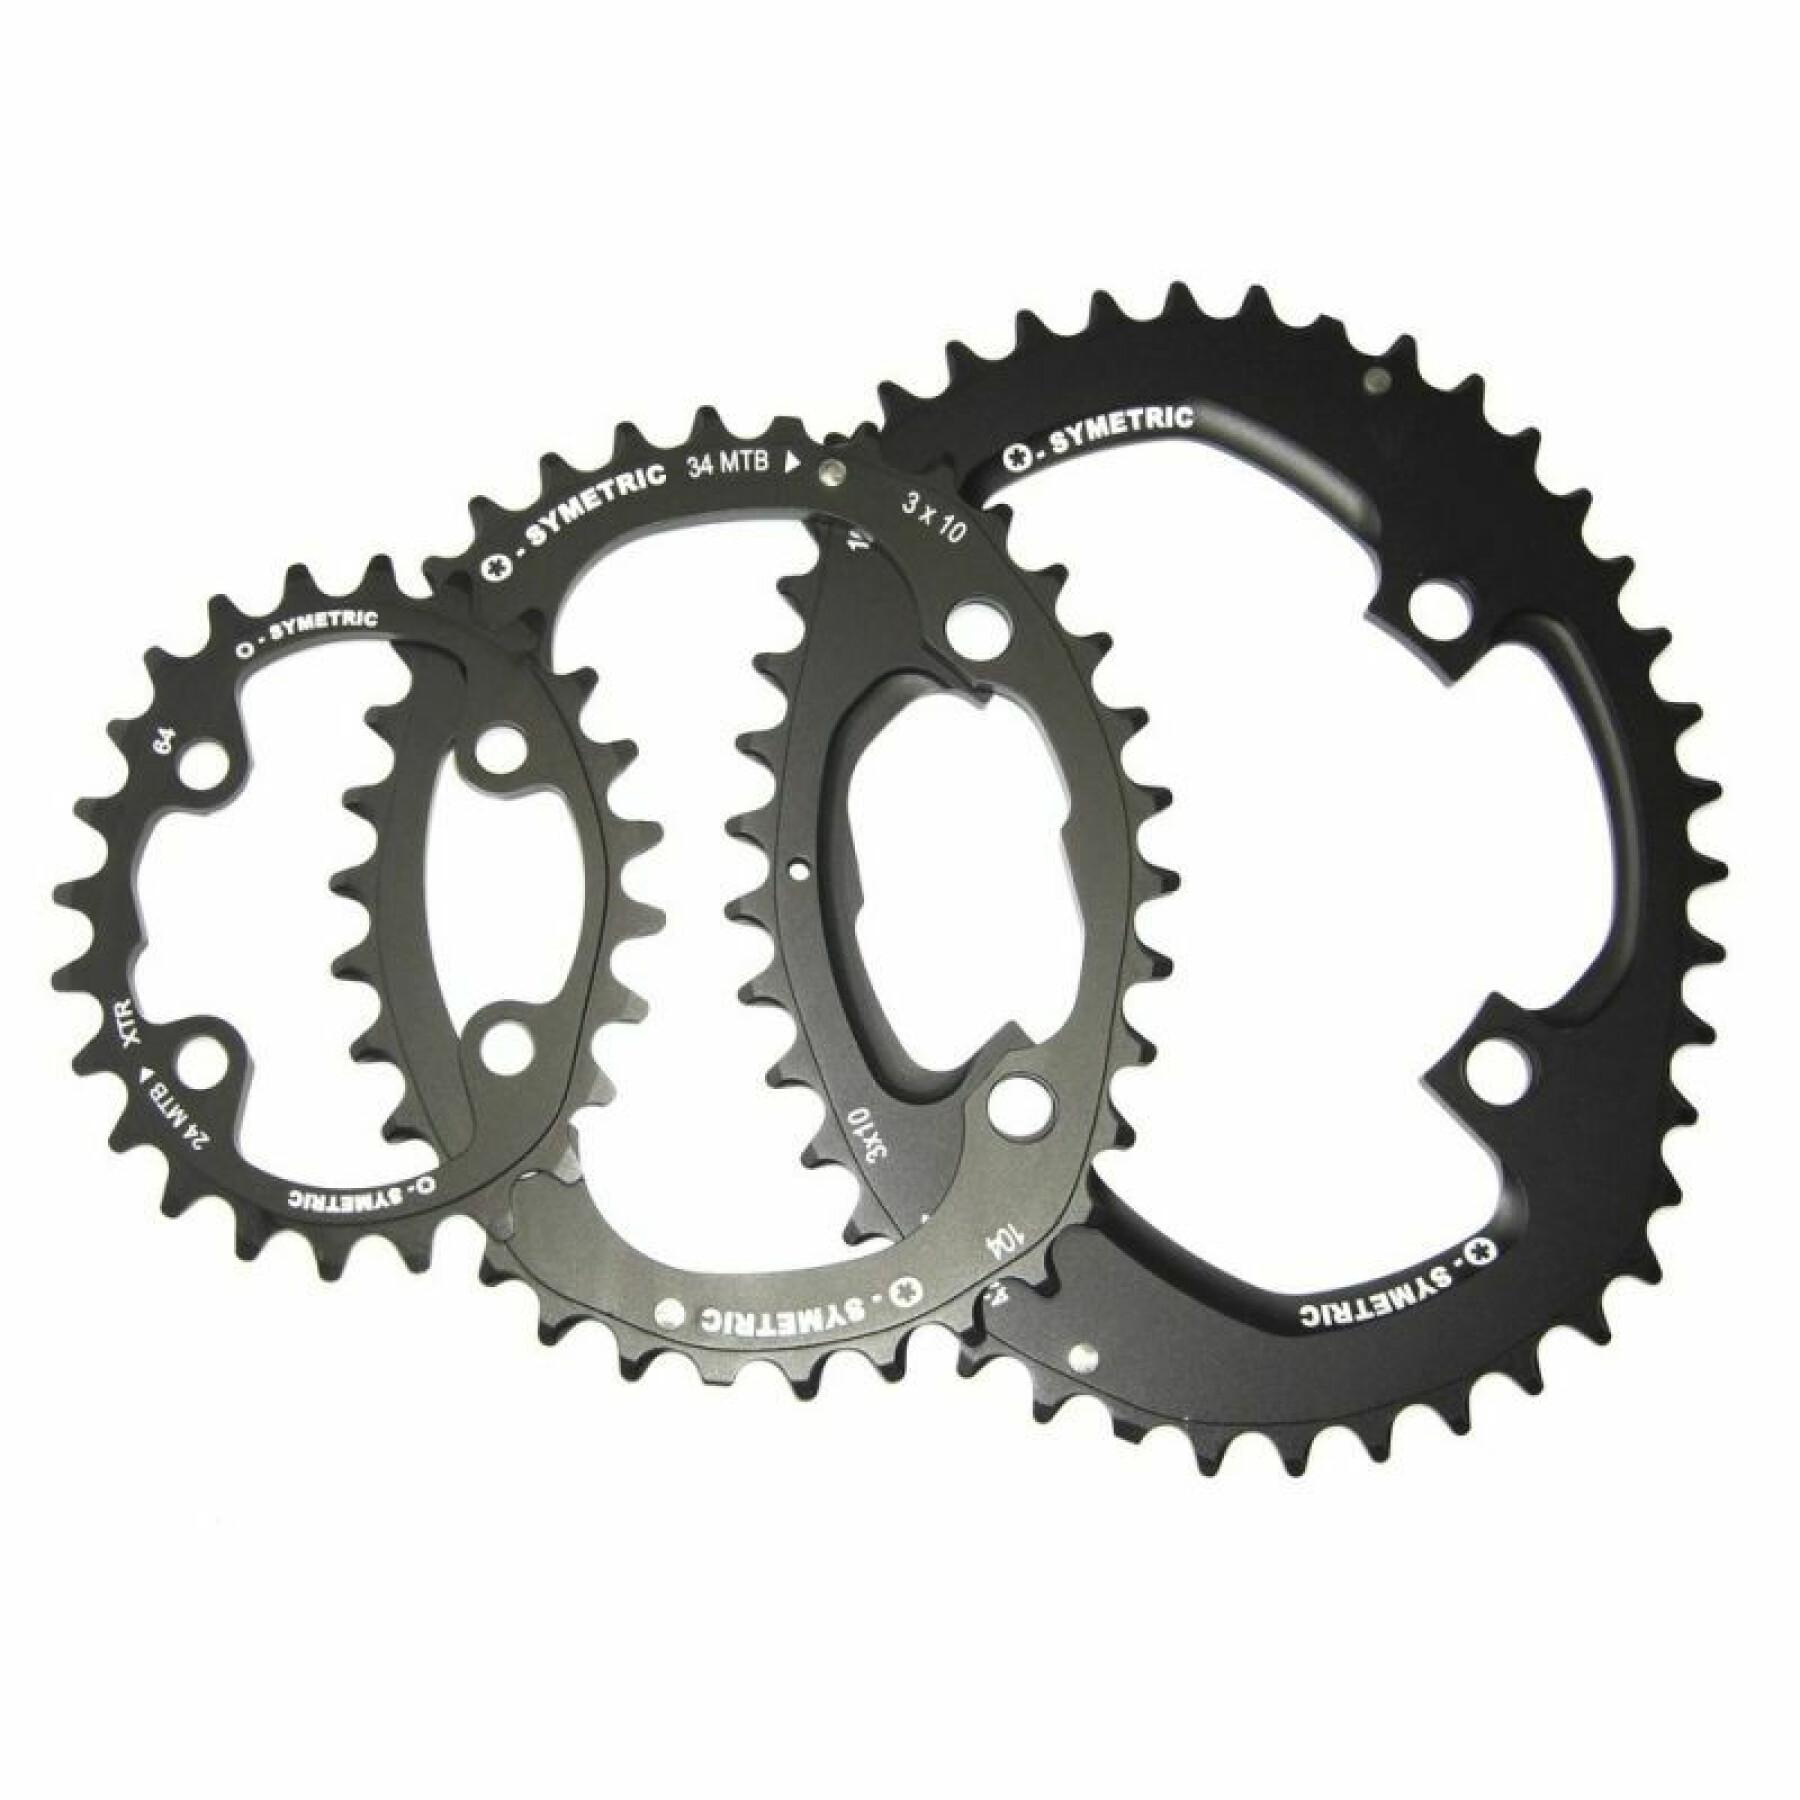 osymetric mtb bandejas Stronglight 104/64 bcd 24-34-42T